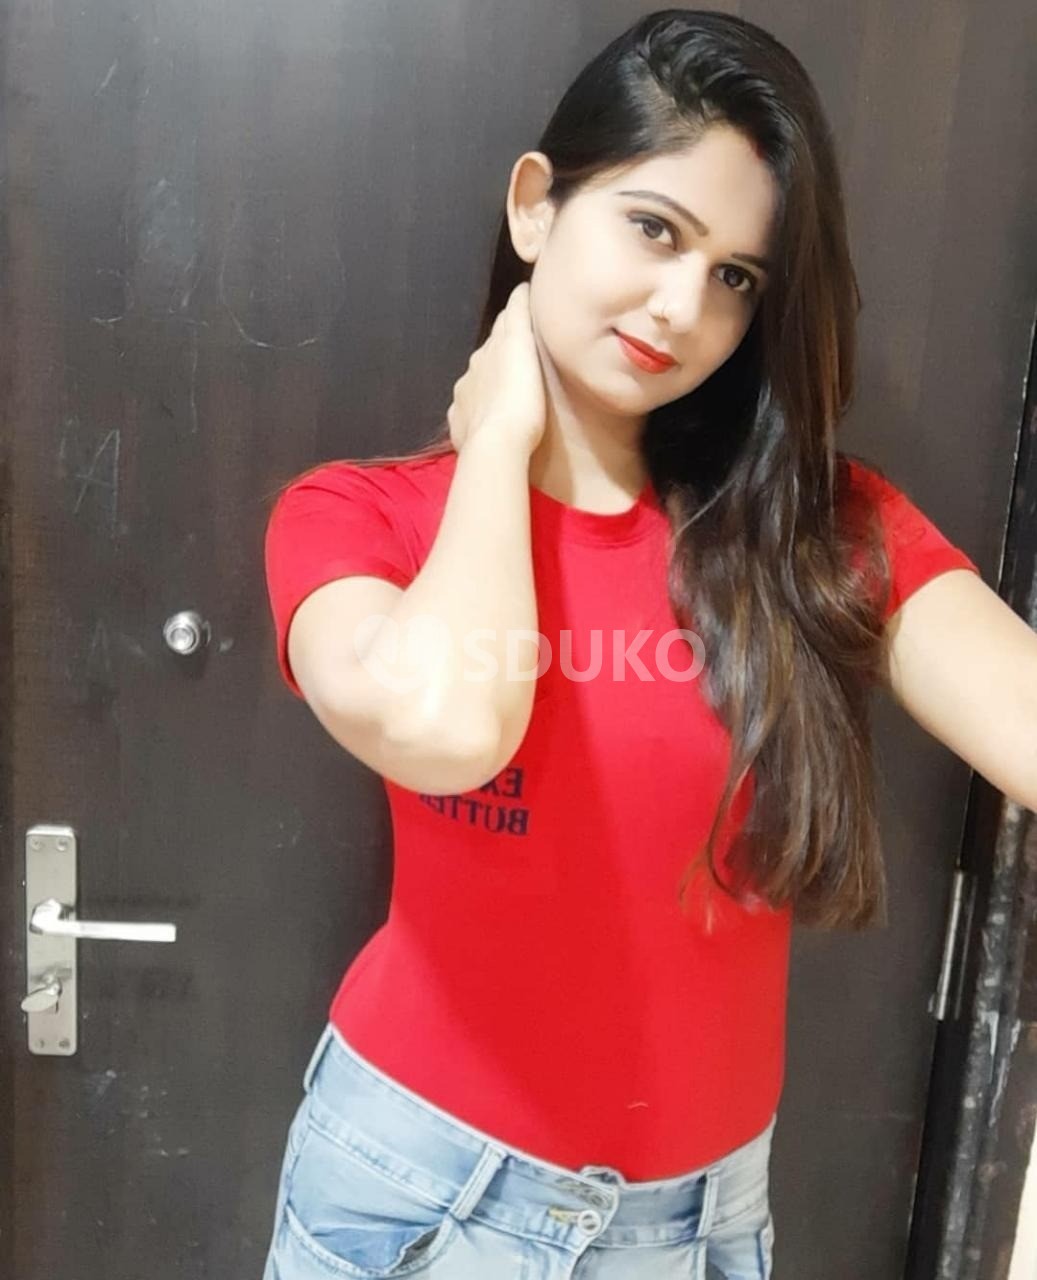 Koramangala ☎️ VIP LOW RATE (Kavya) ESCORT FULL HARD FUCK WITH NAUGHTY IF YOU WANT TO FUCK MY PUSSY WITH BIG BOOBS G